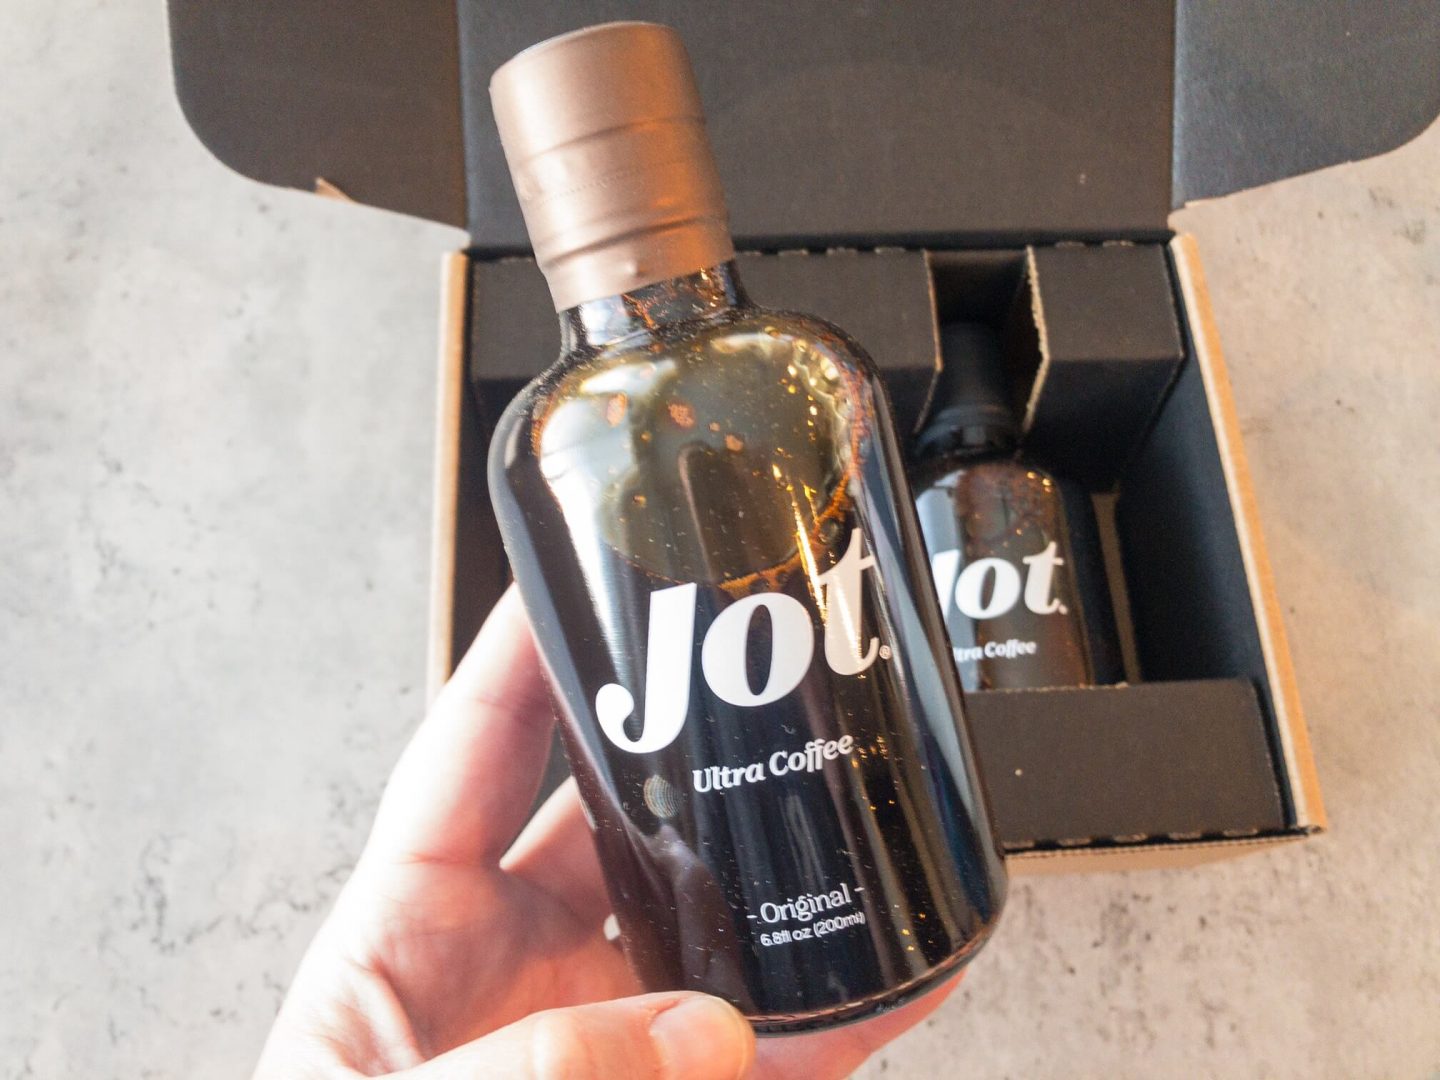 gifts for coffee lovers - jot coffee